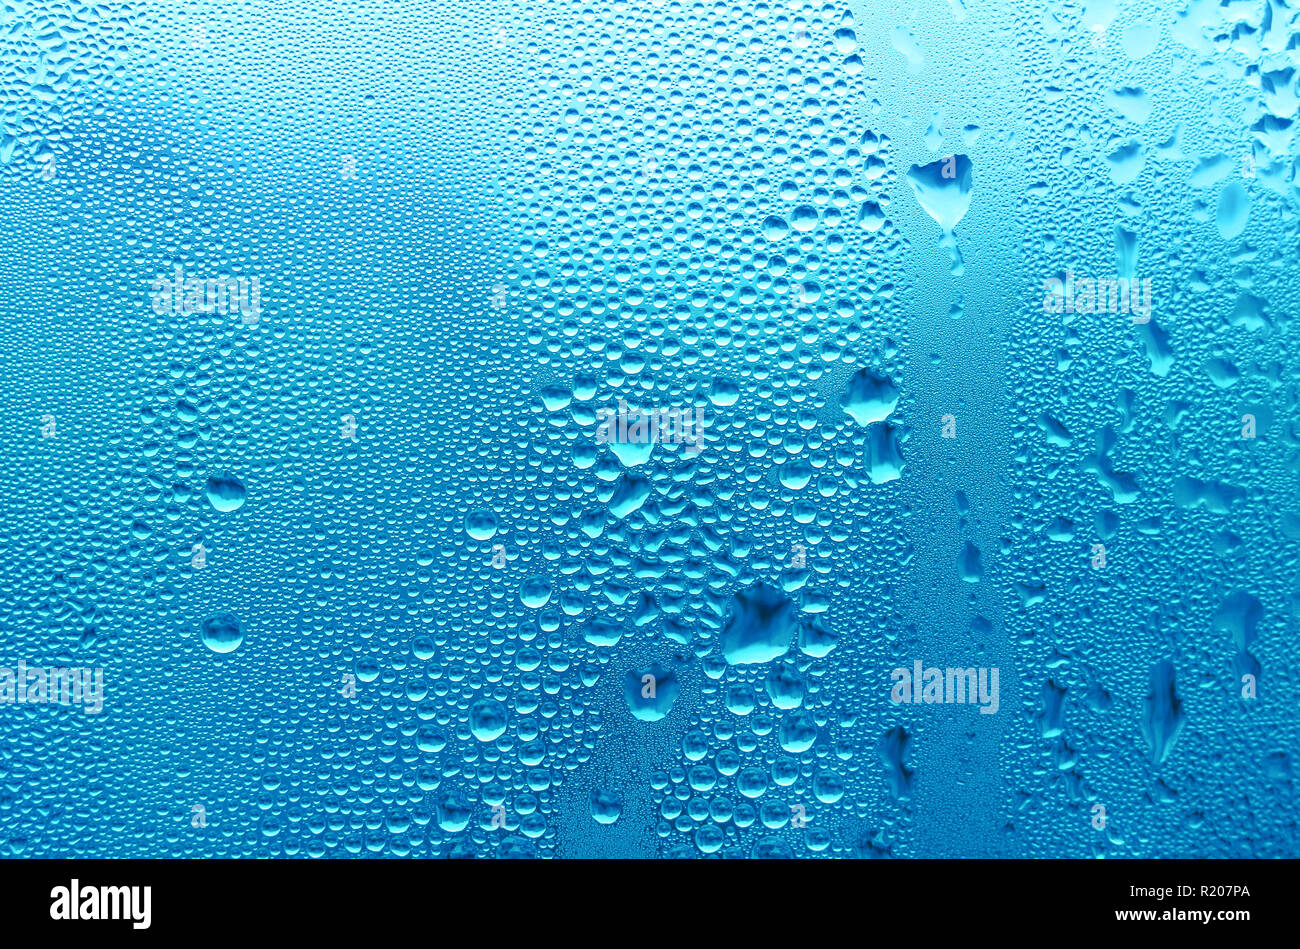 Natural water drops on window glass, close-up texture Stock Photo